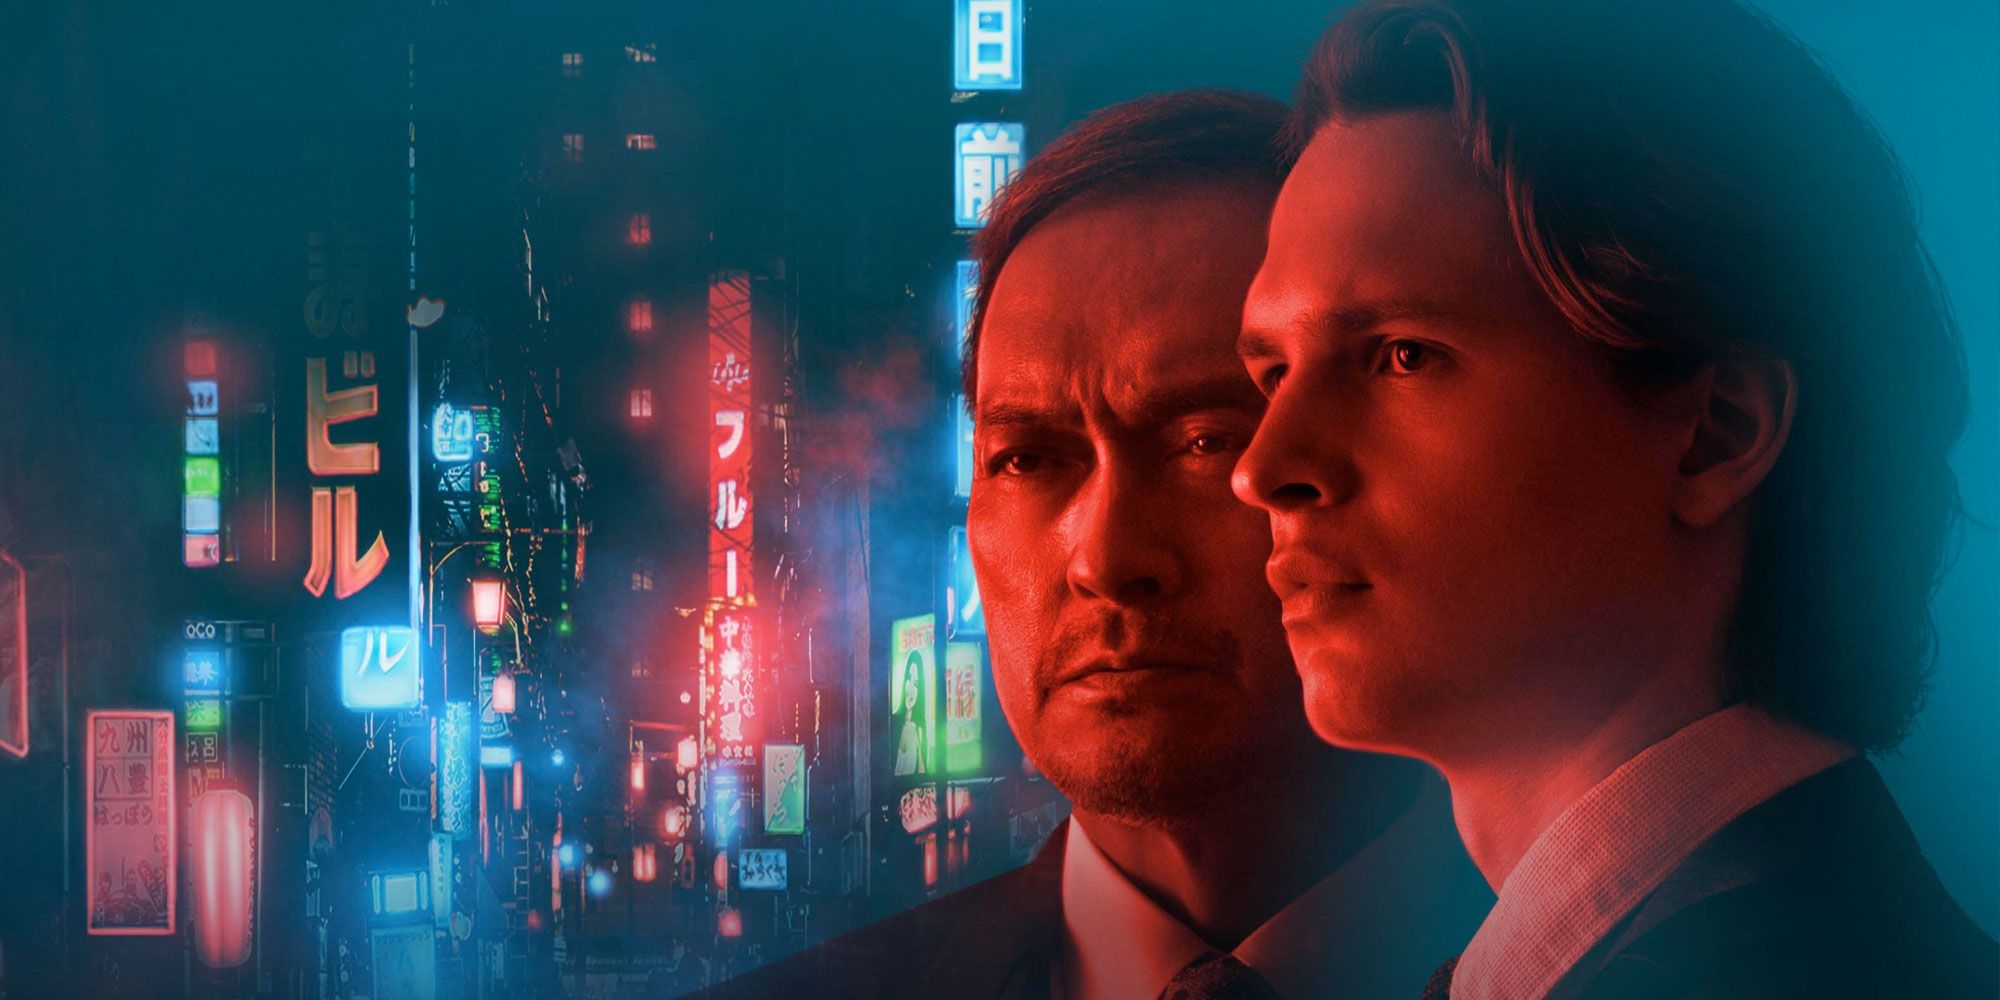 Neon-colored Tokyo Vice promo art featuring Ken Watanabe and Ansel Elgort's characters.